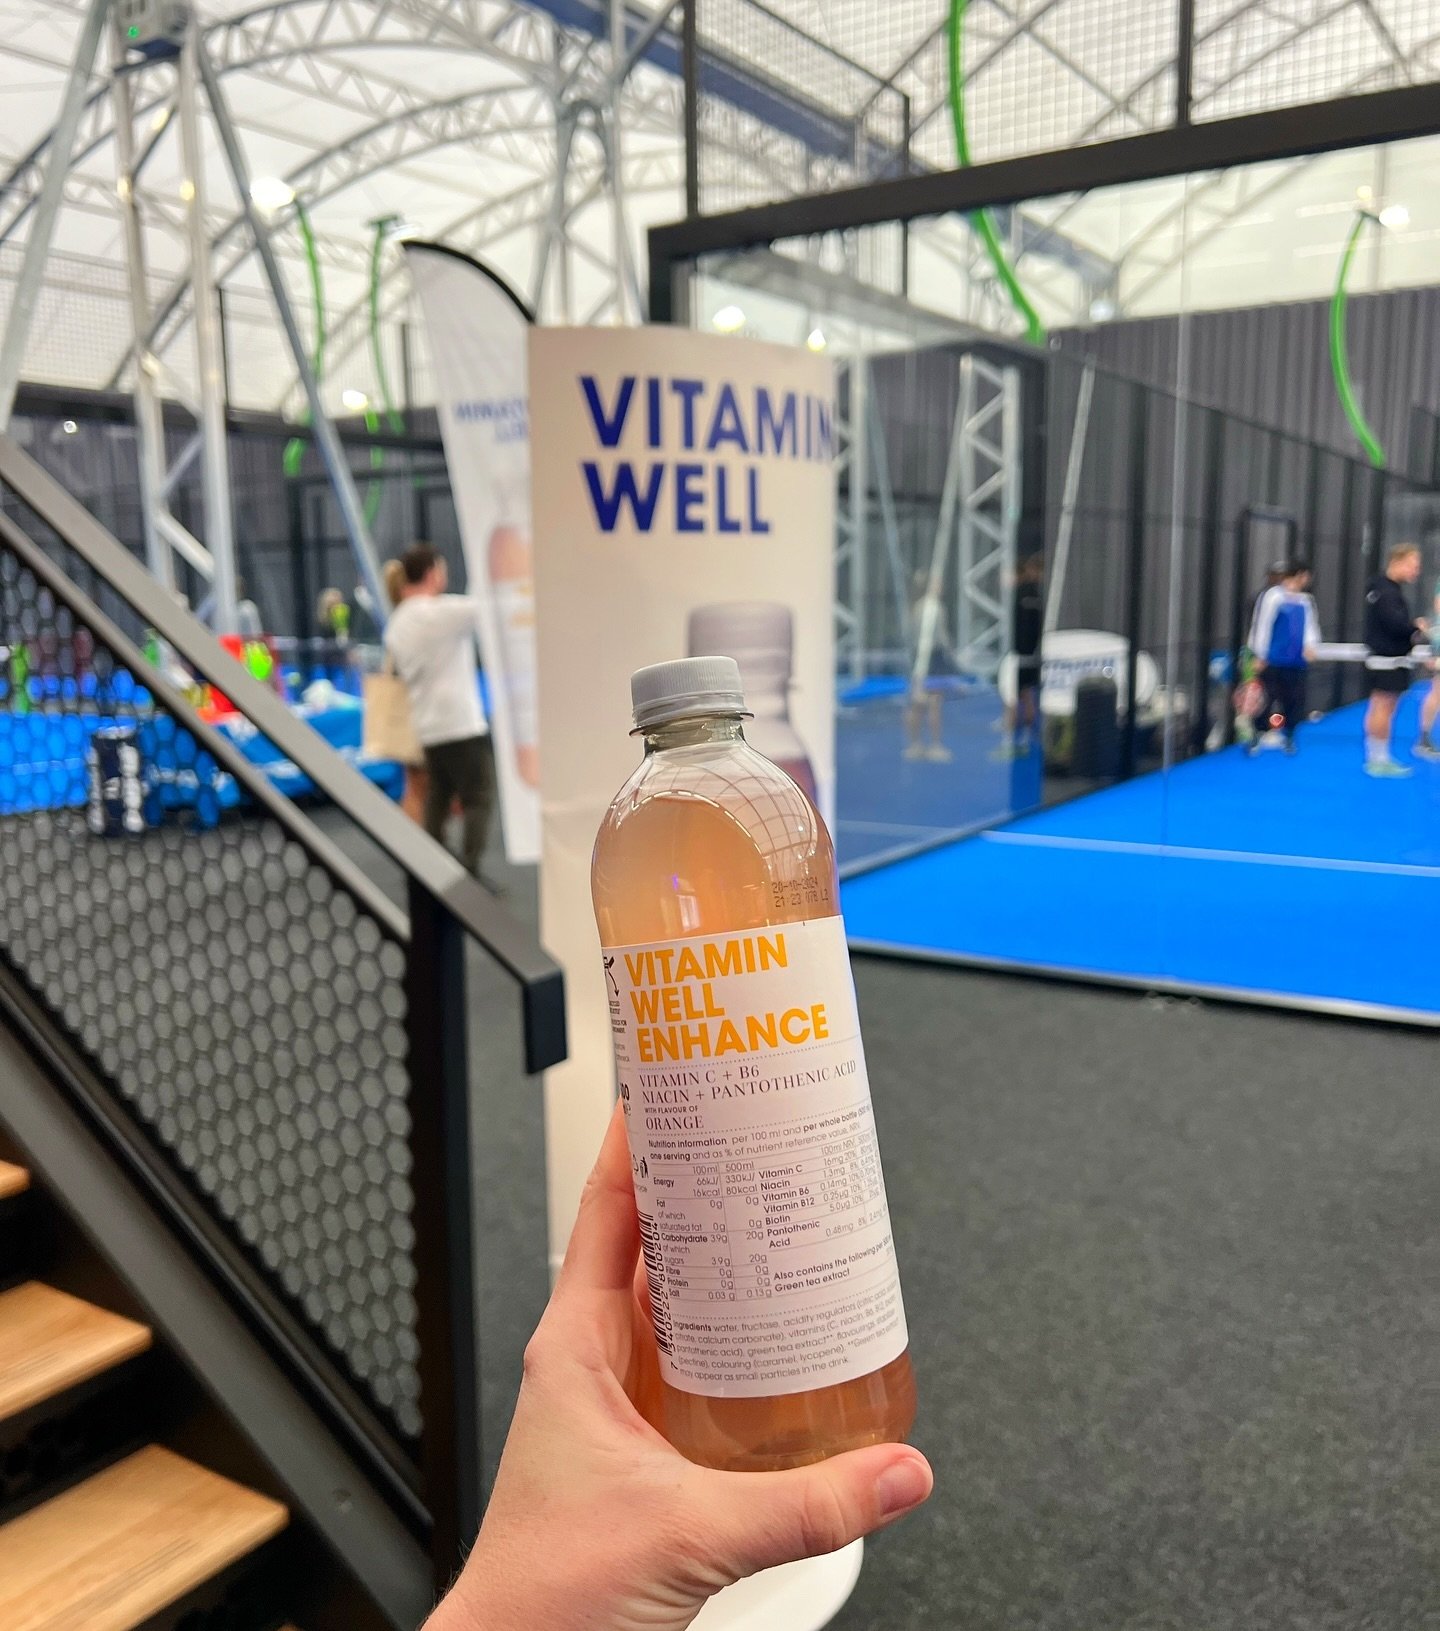 NEW @vitaminwell_uk flavour launches today 😍 Meet ENHANCE 🍊

Not only is it bursting with a refreshing orange flavour that is ideal for hot summer days, but it&rsquo;s packed with a versatile combination of vitamins such as vitamin C, B6 and niacin